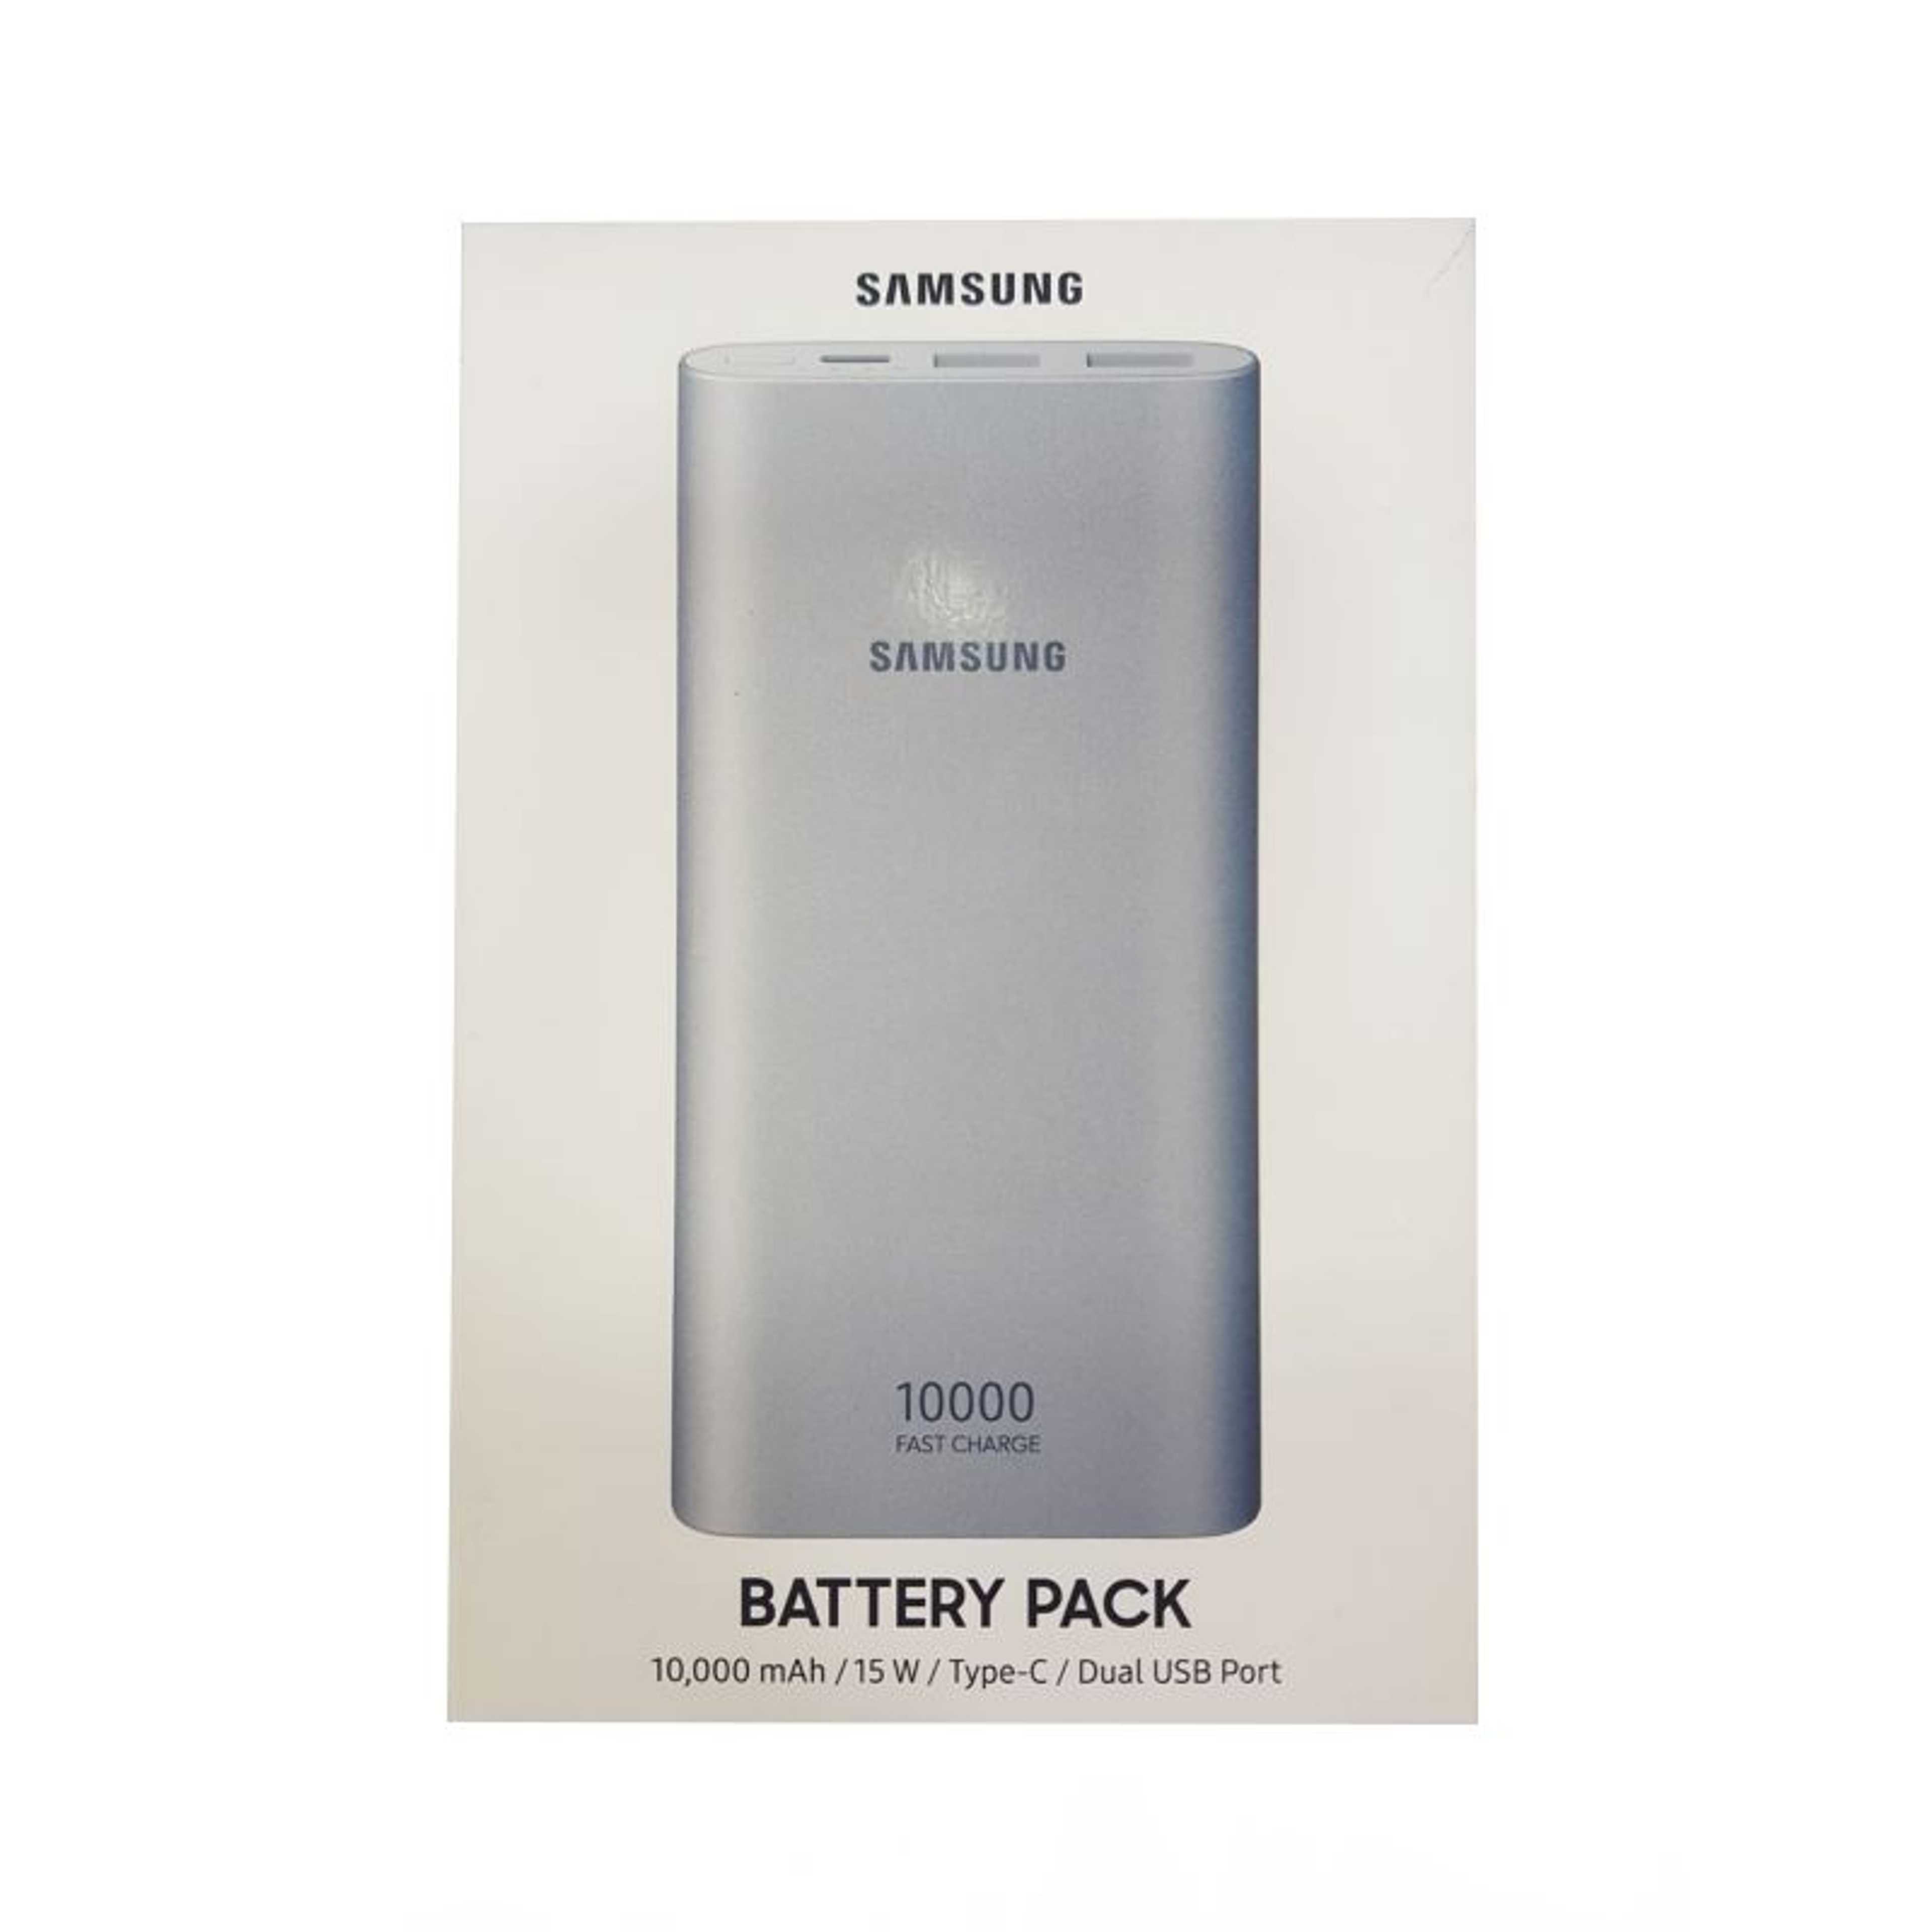 Samsung 10000Fast Charge Battery Pack 15W Type-C Dual USB Port